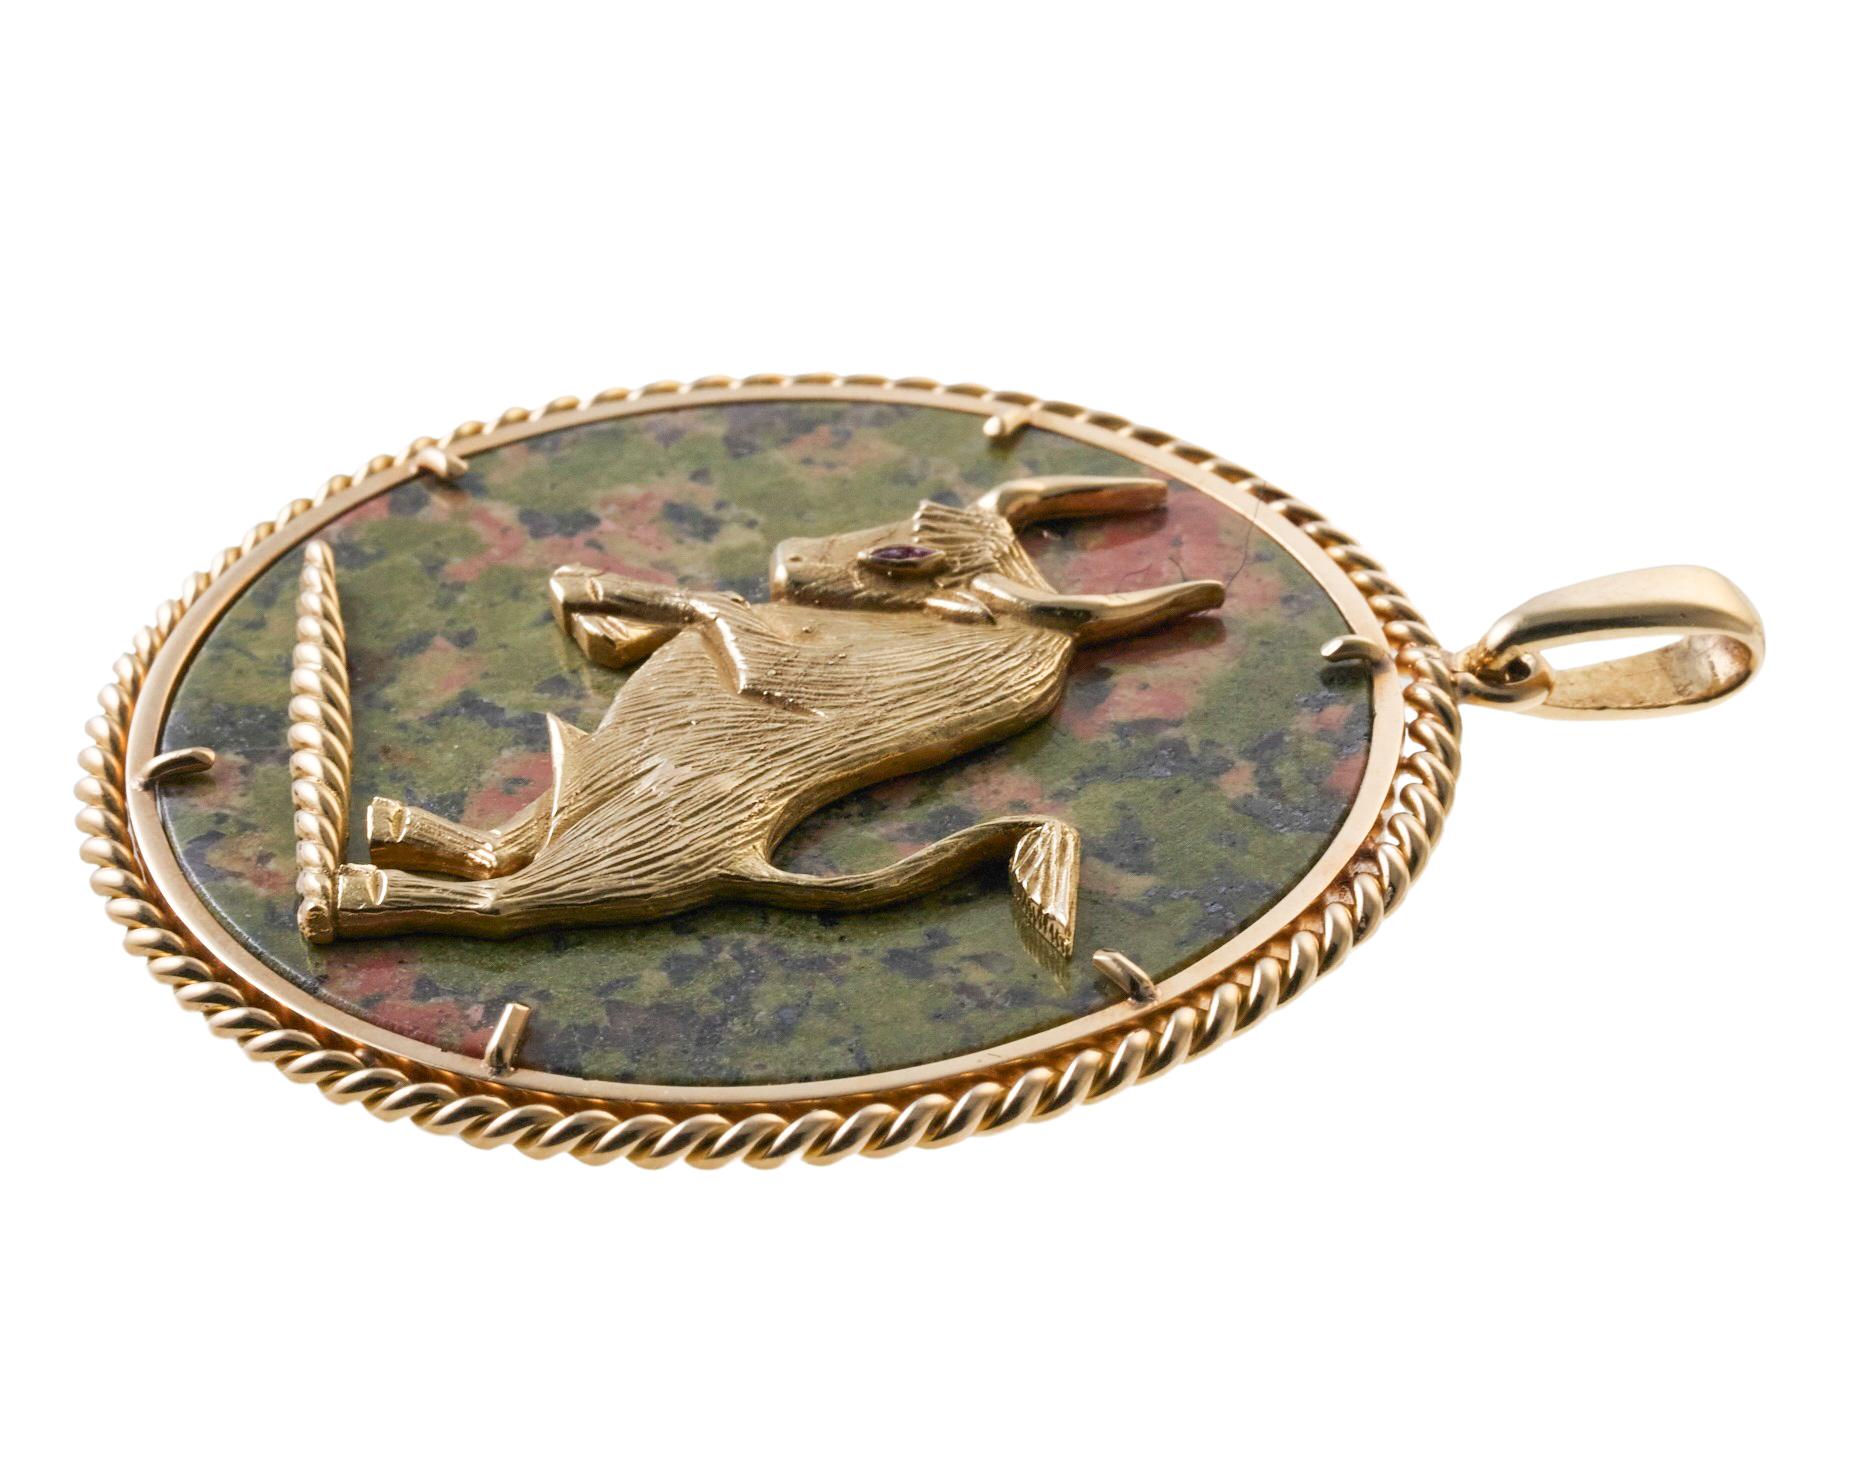 Vintage, circa 1970s 14k gold large pendant, depicting a bull or Taurus Zodiac sign. Set with inlay exotic gemstone, and ruby bull's eye. Pendant is 2.25